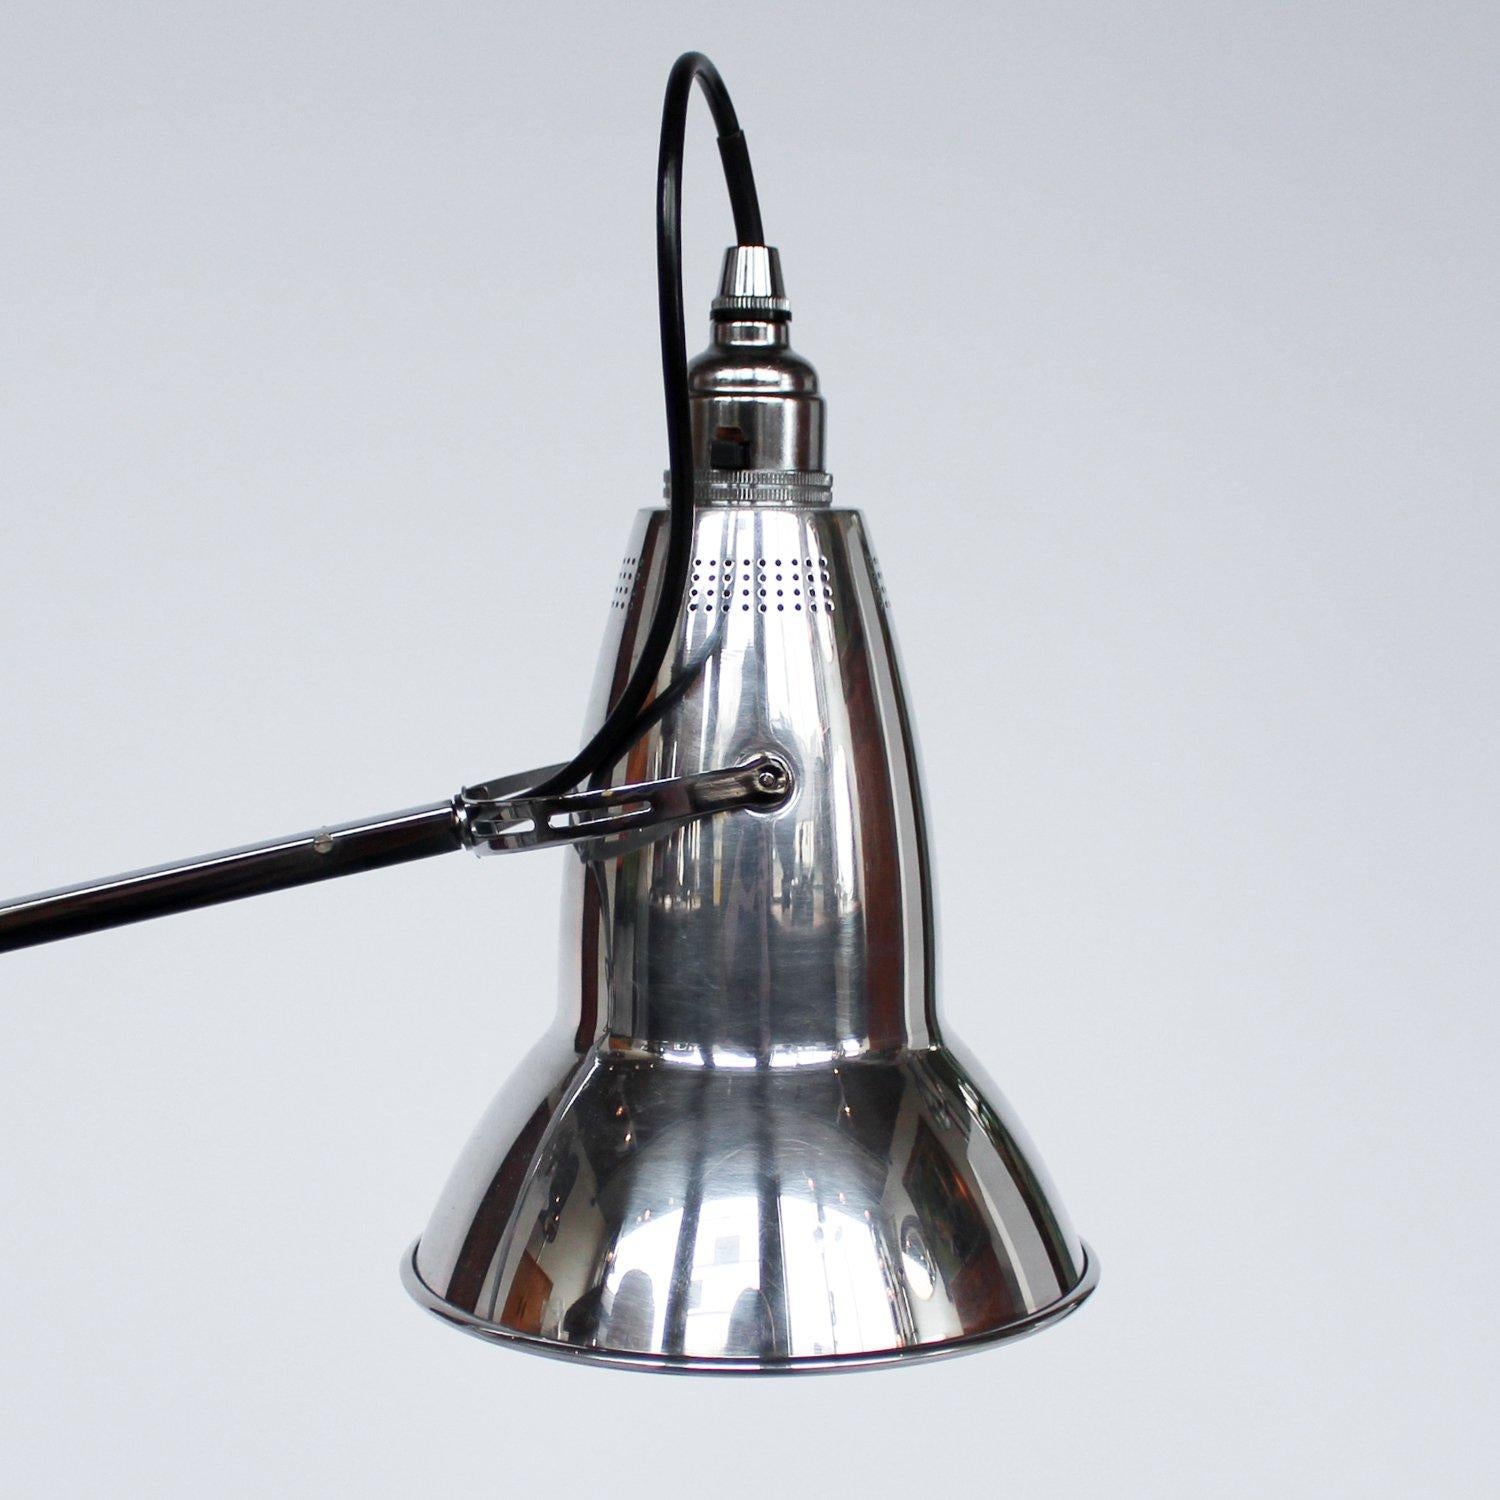 Mid-20th Century Herbert Terry & Sons Art Deco Chromed and Polished Metal Anglepoise Desk Lamp 